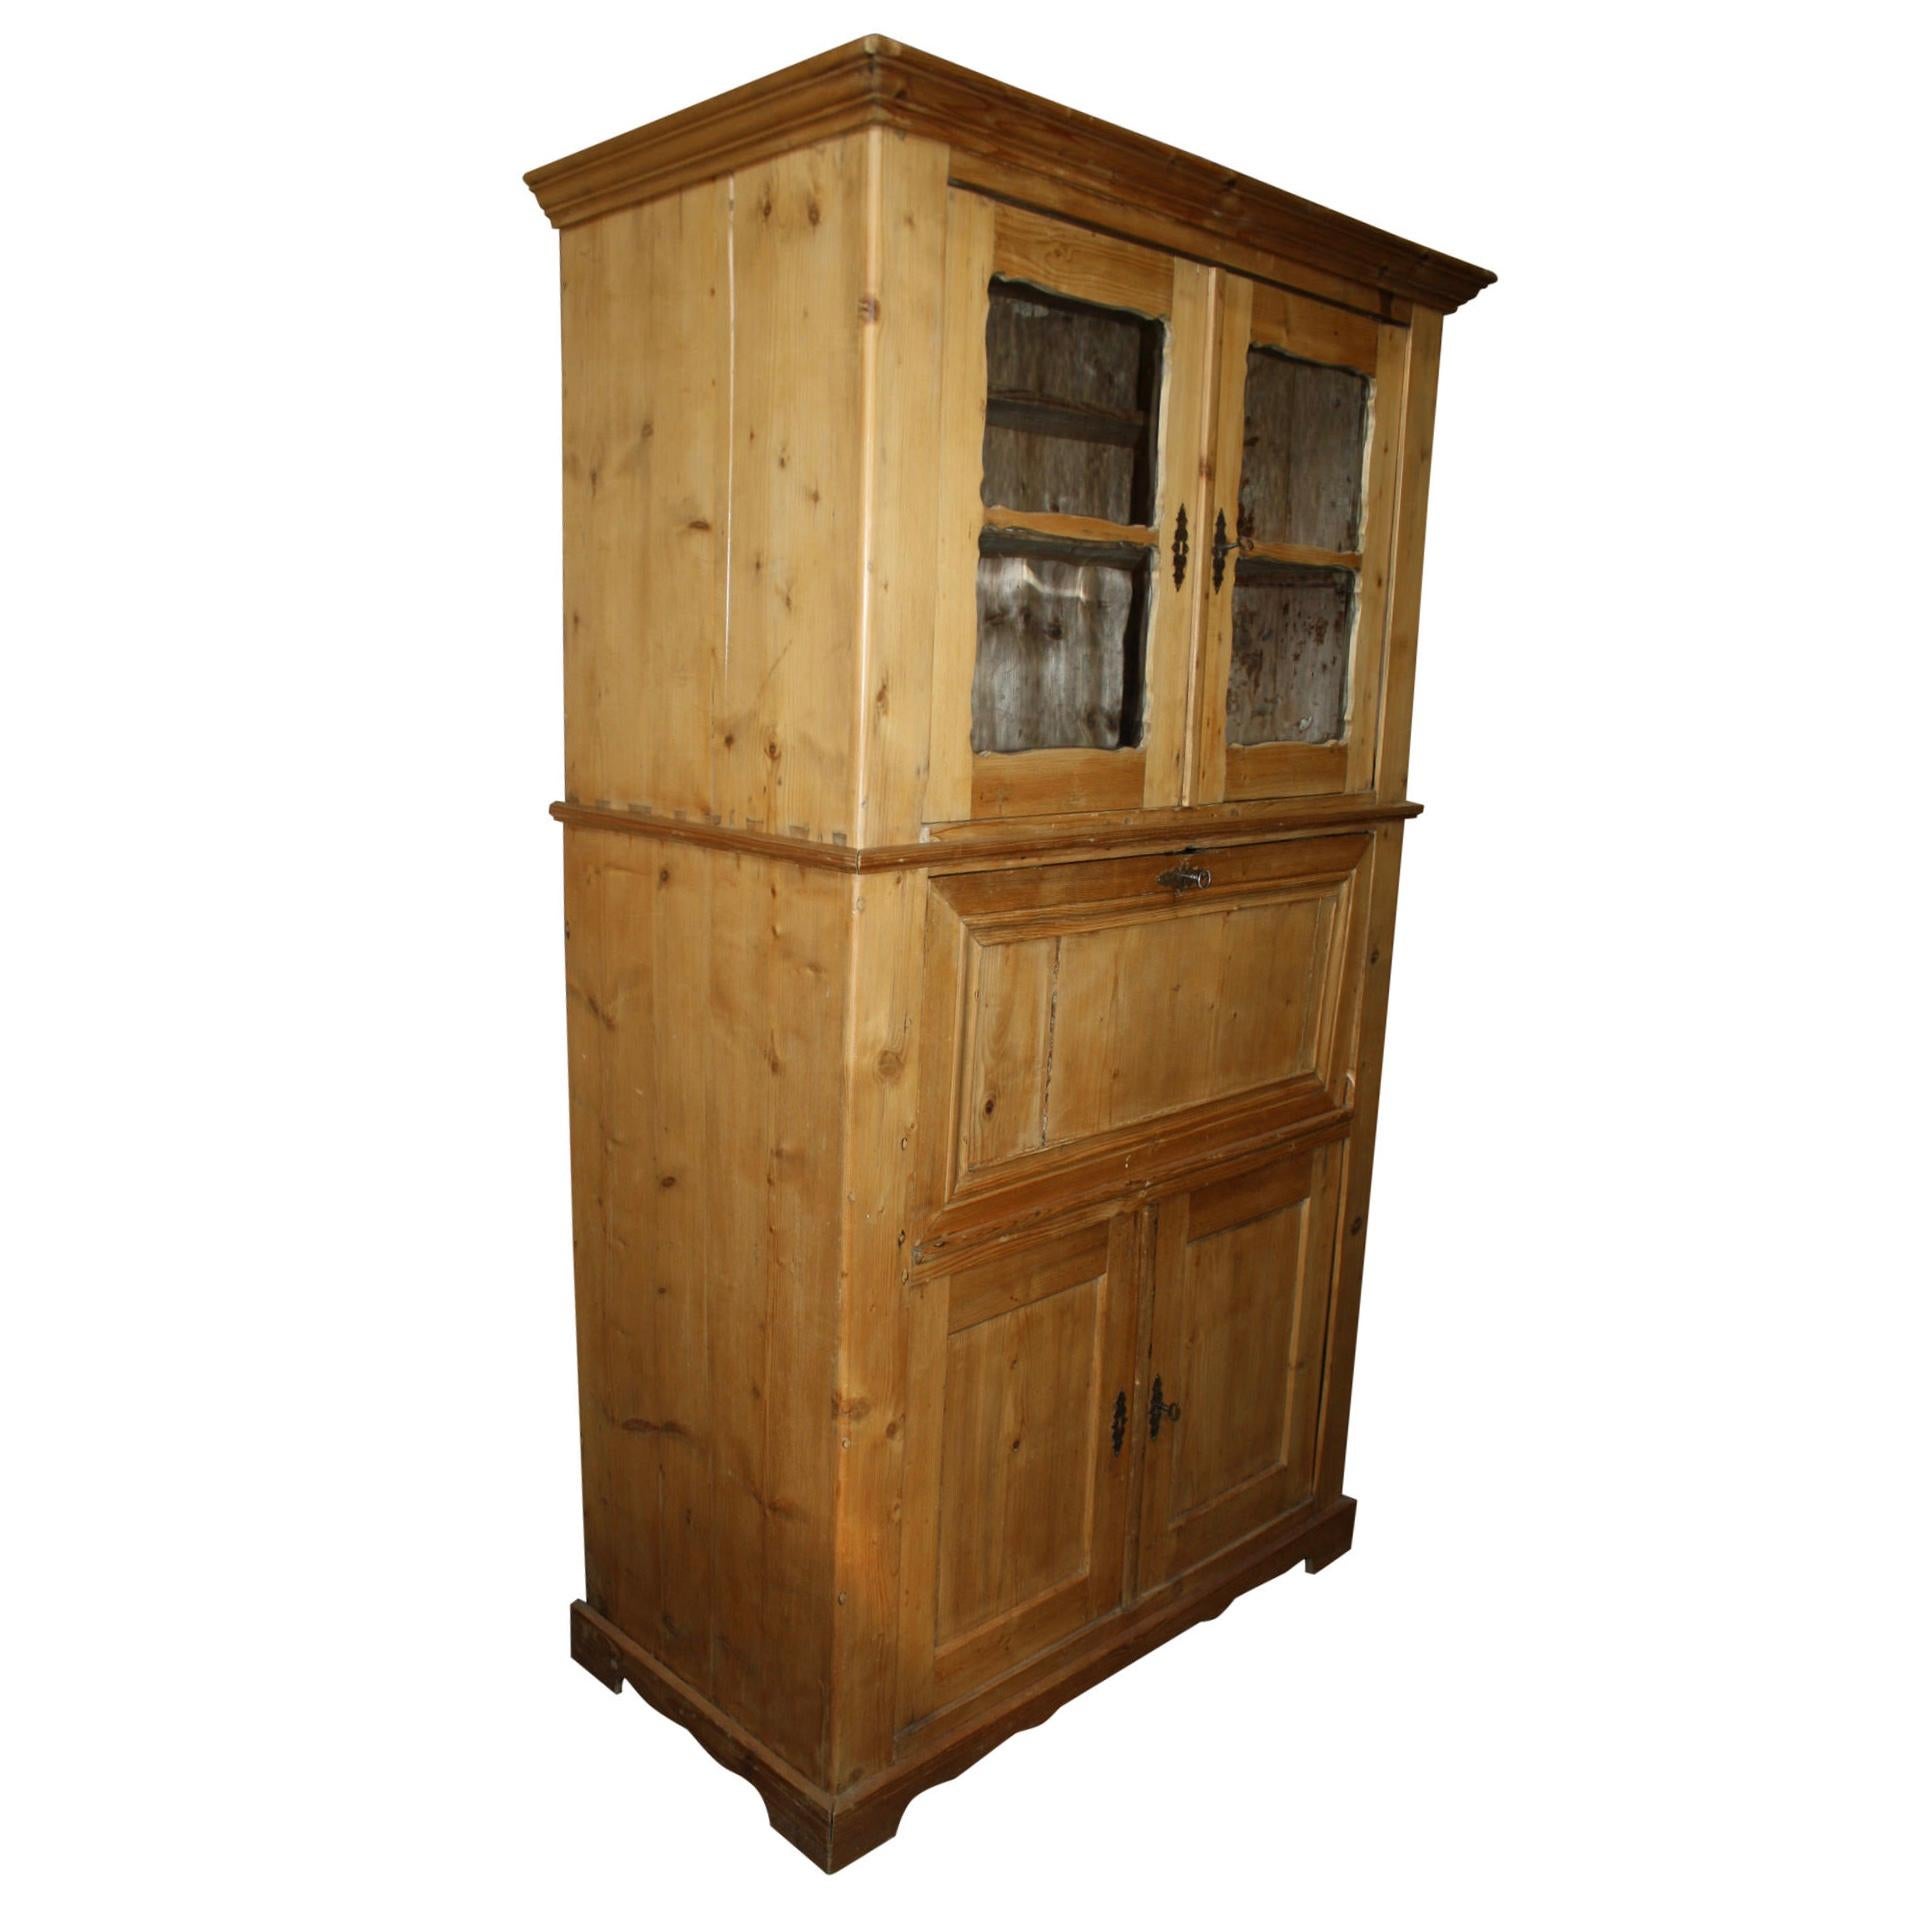 Comprised of three sections, this tall, pine secretary has generous storage and practical organization. It features an upper cabinet with two glass doors and single shelf, a drop-down front that opens to five small drawers, and a lower cabinet with